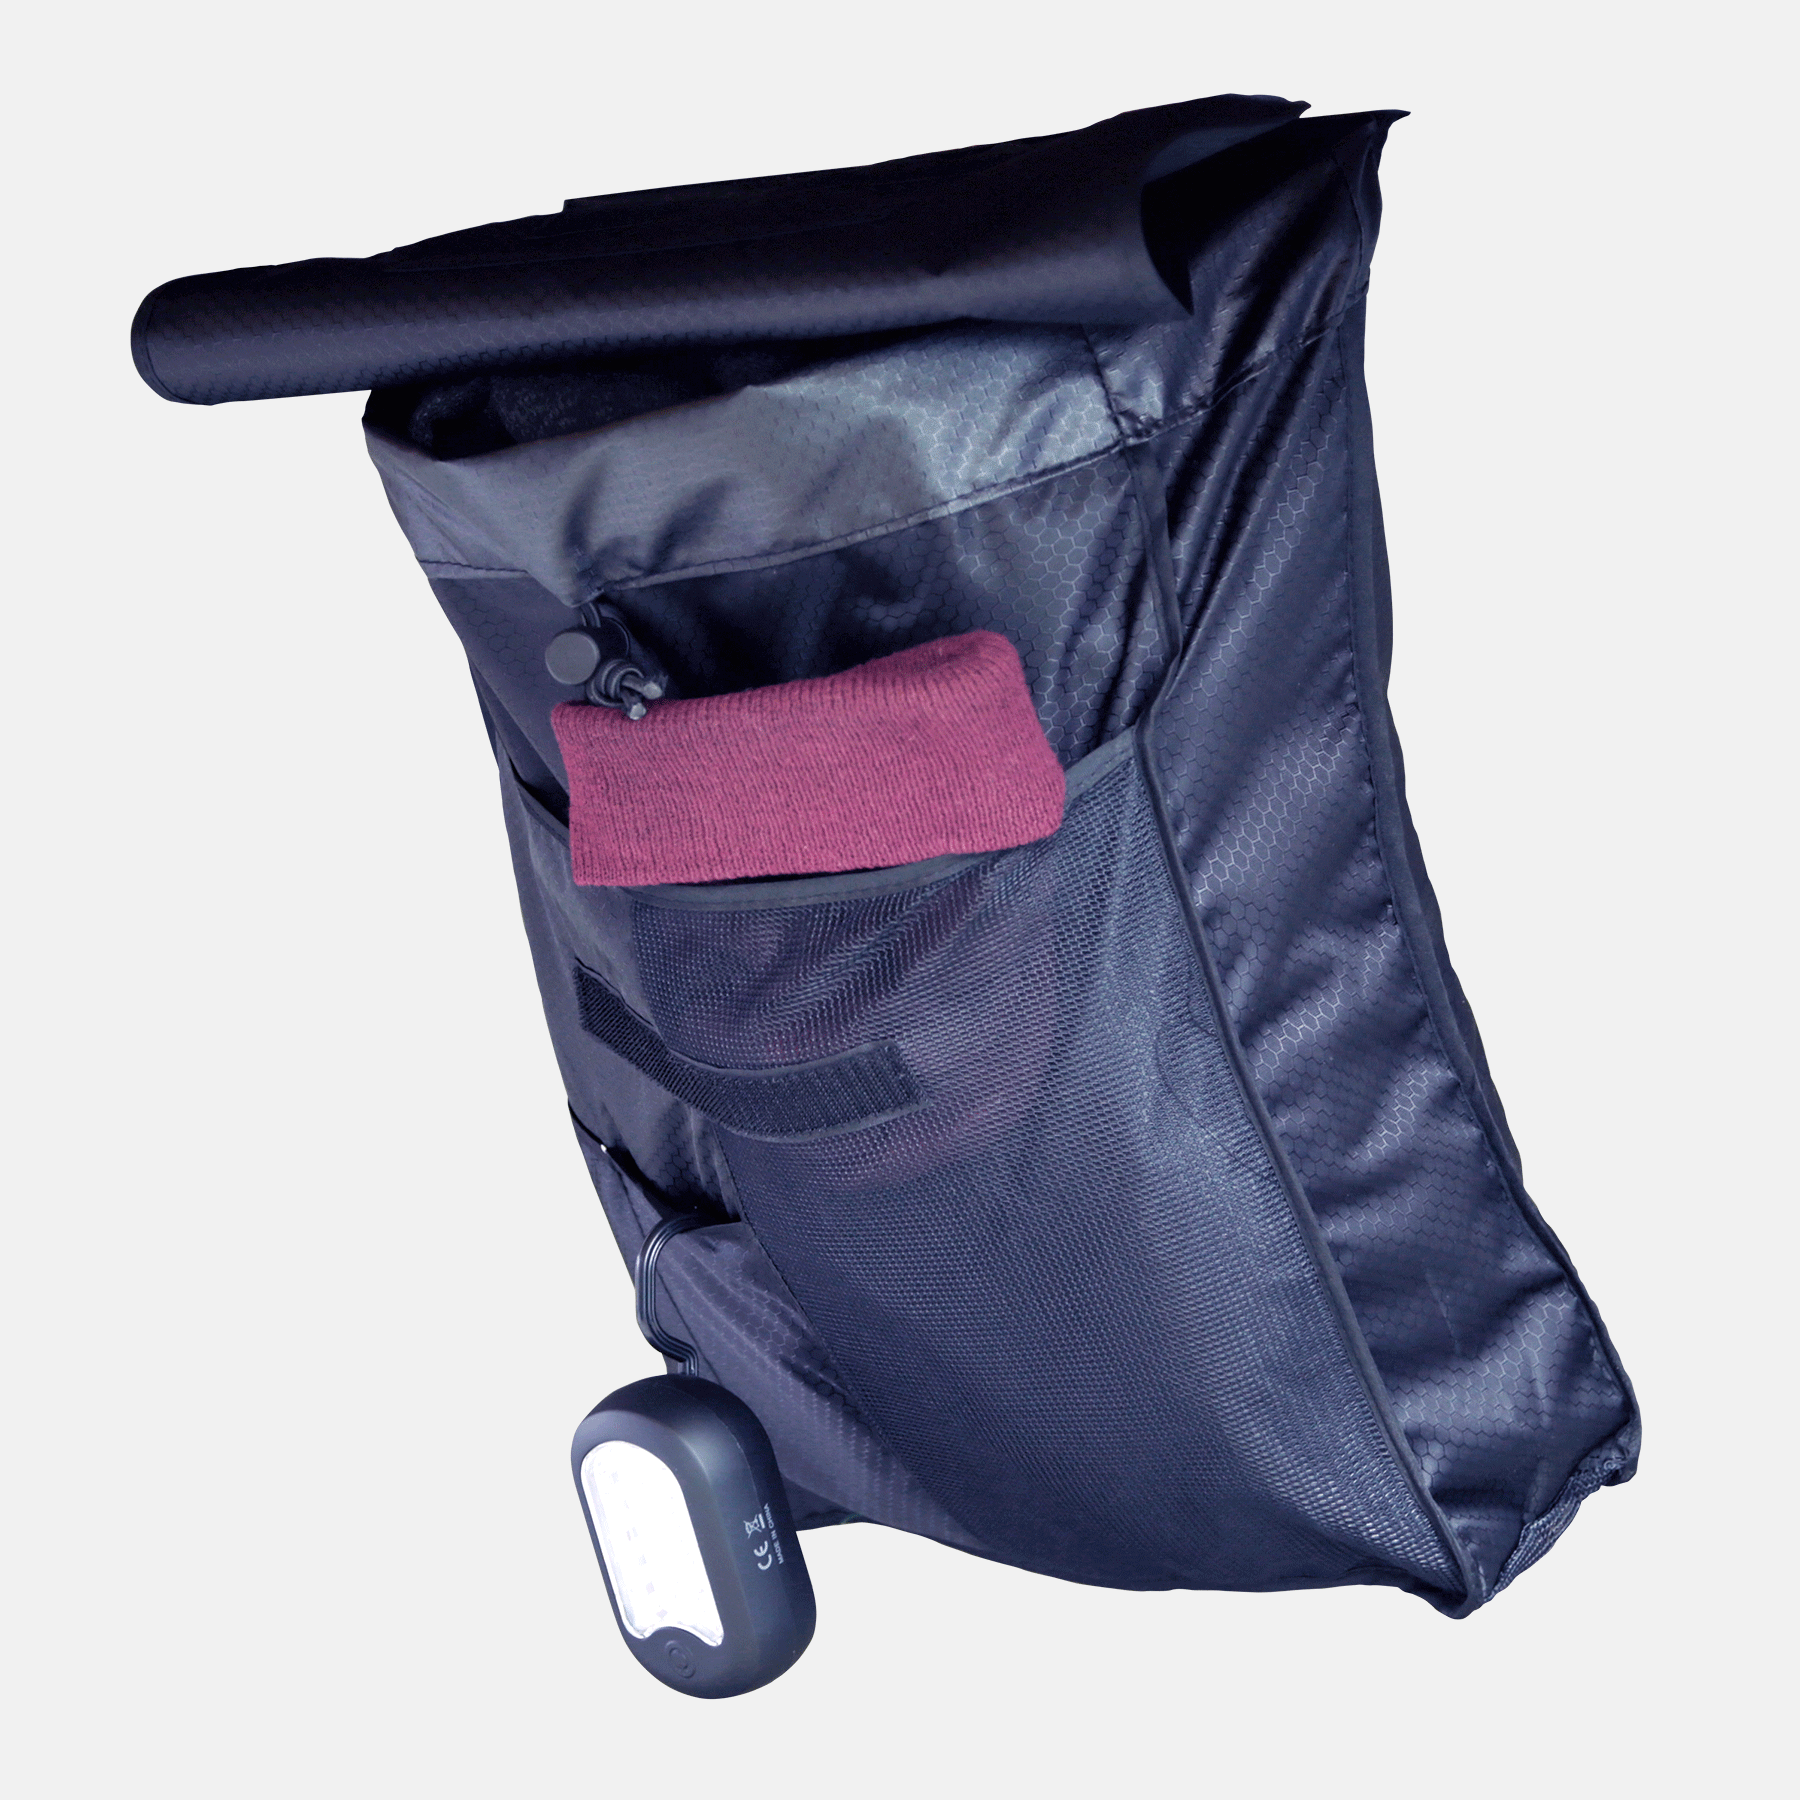 Shoe bag for roof tent 